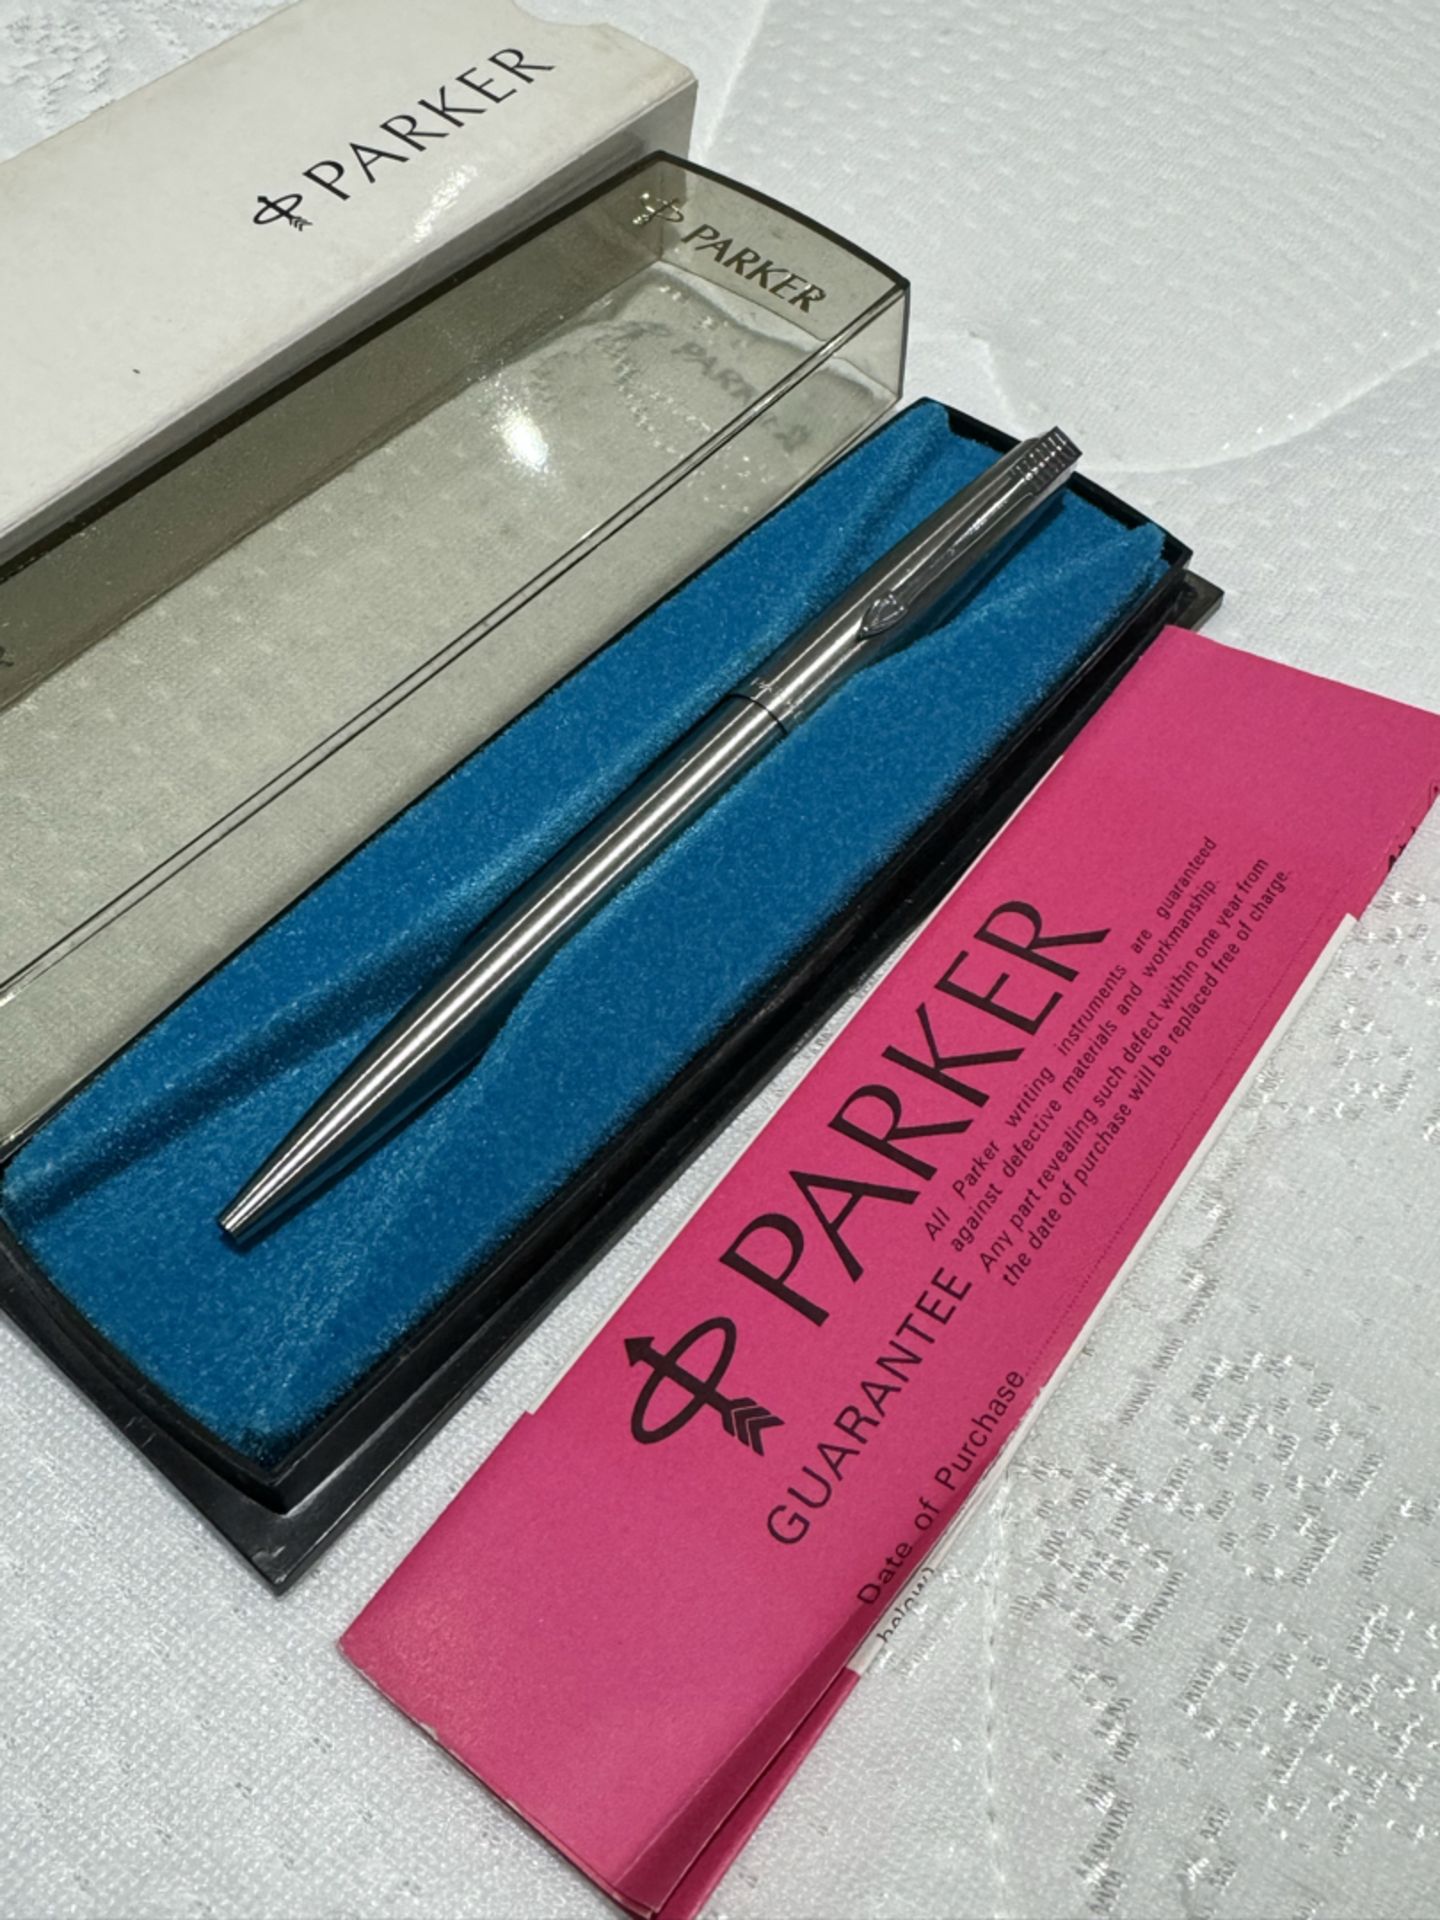 Vintage Parker Pen in Original Box - Looks new but some discolouration to packaging - Image 2 of 3